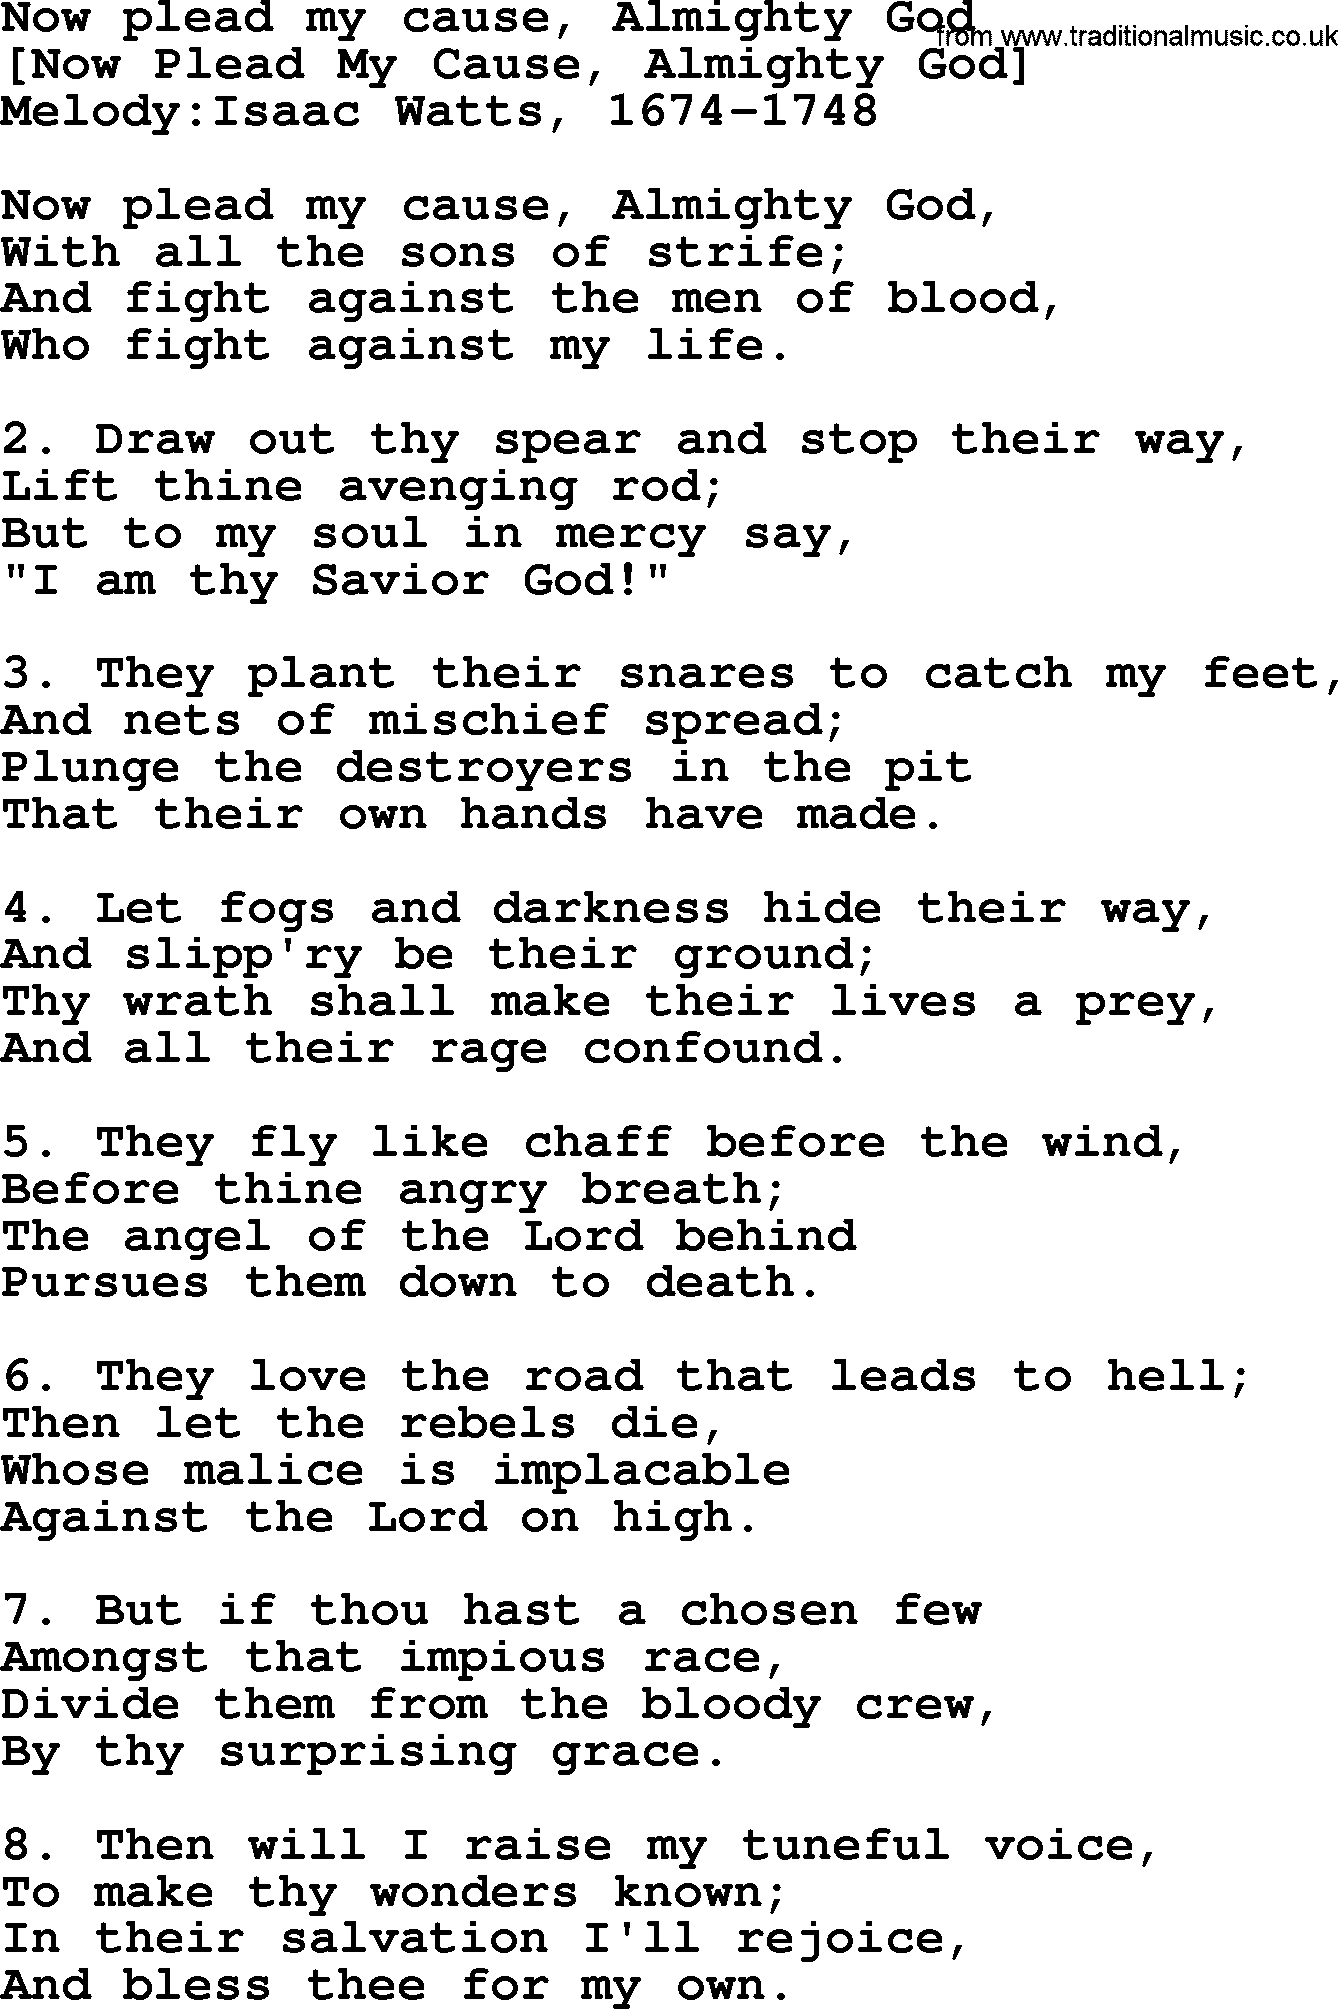 Old English Song: Now Plead My Cause, Almighty God lyrics